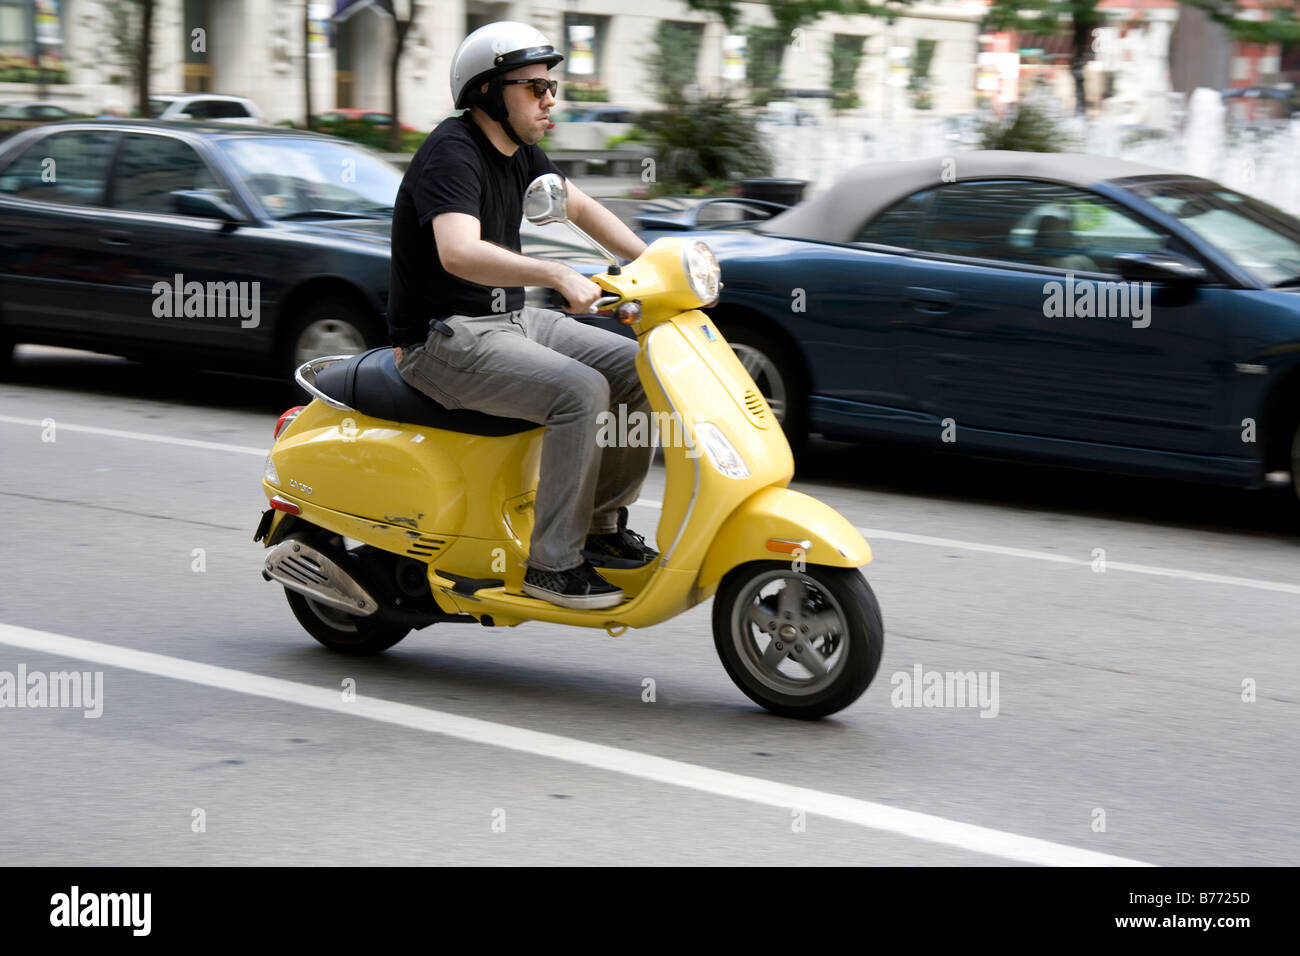 Man on a yellow scooter in traffic, chicago, IL USA Stock Photo